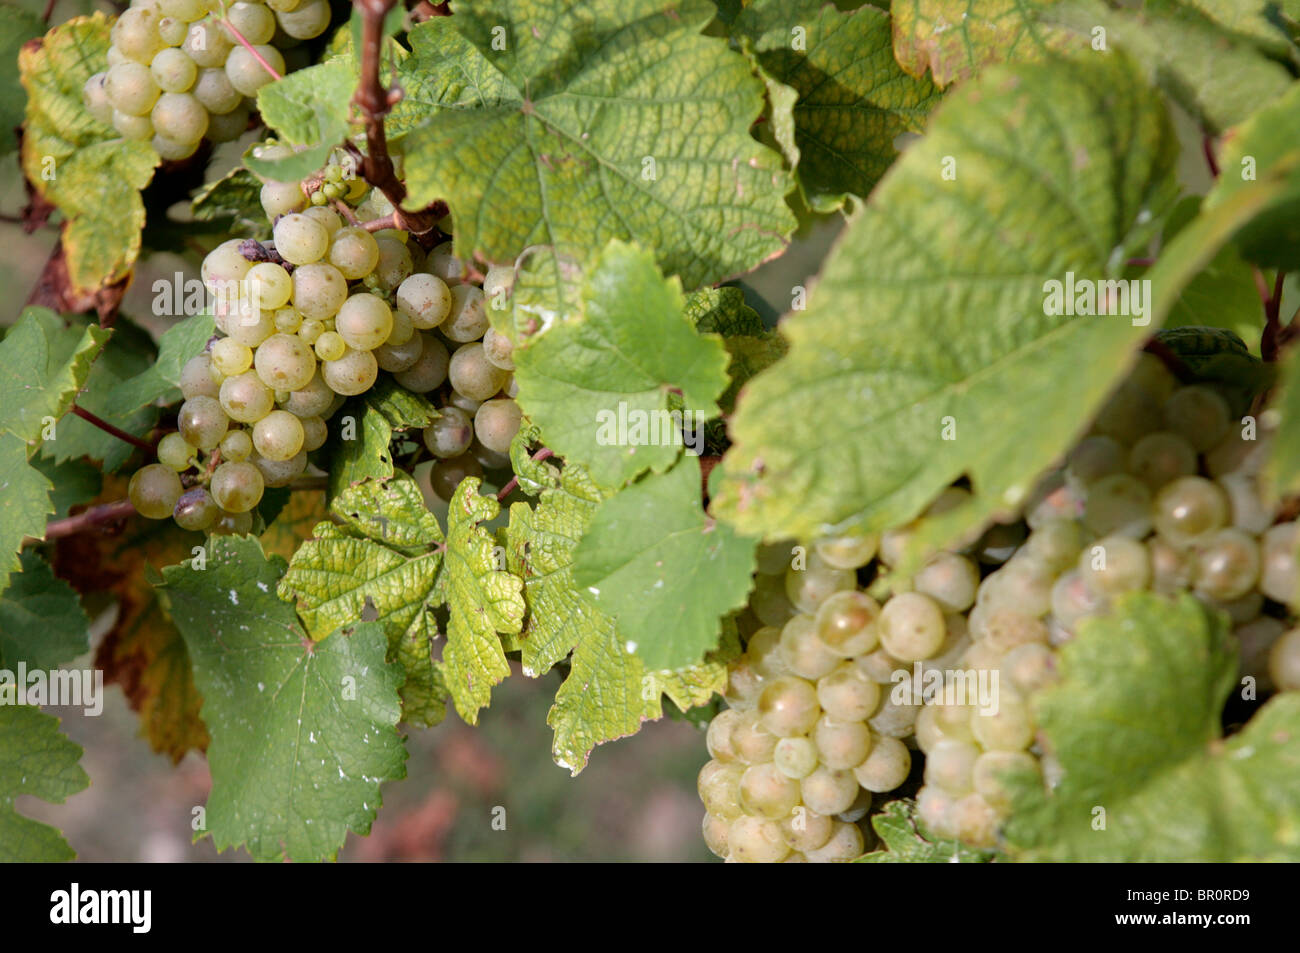 Grapes on the vine at a vineyard.  Stock Photo